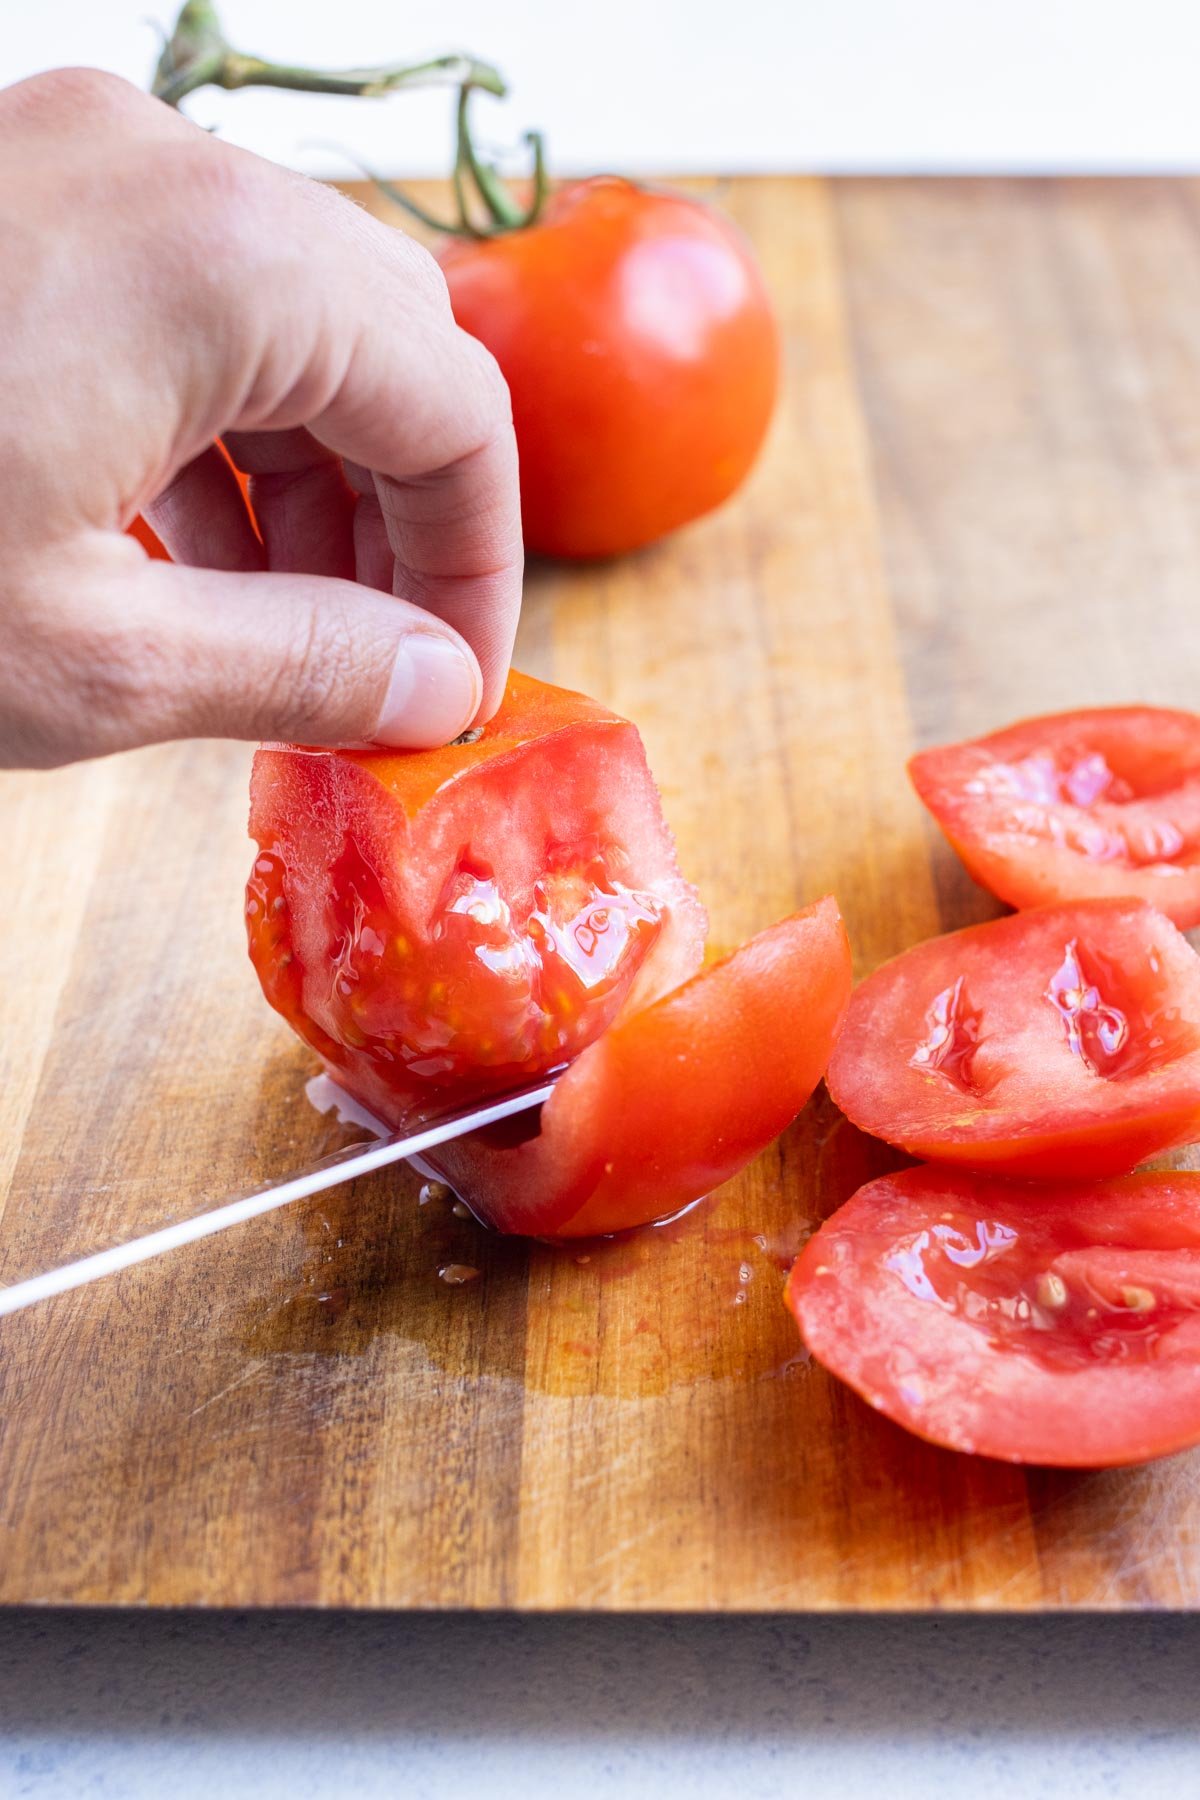 A knife cuts wedges away from the core of a tomato.